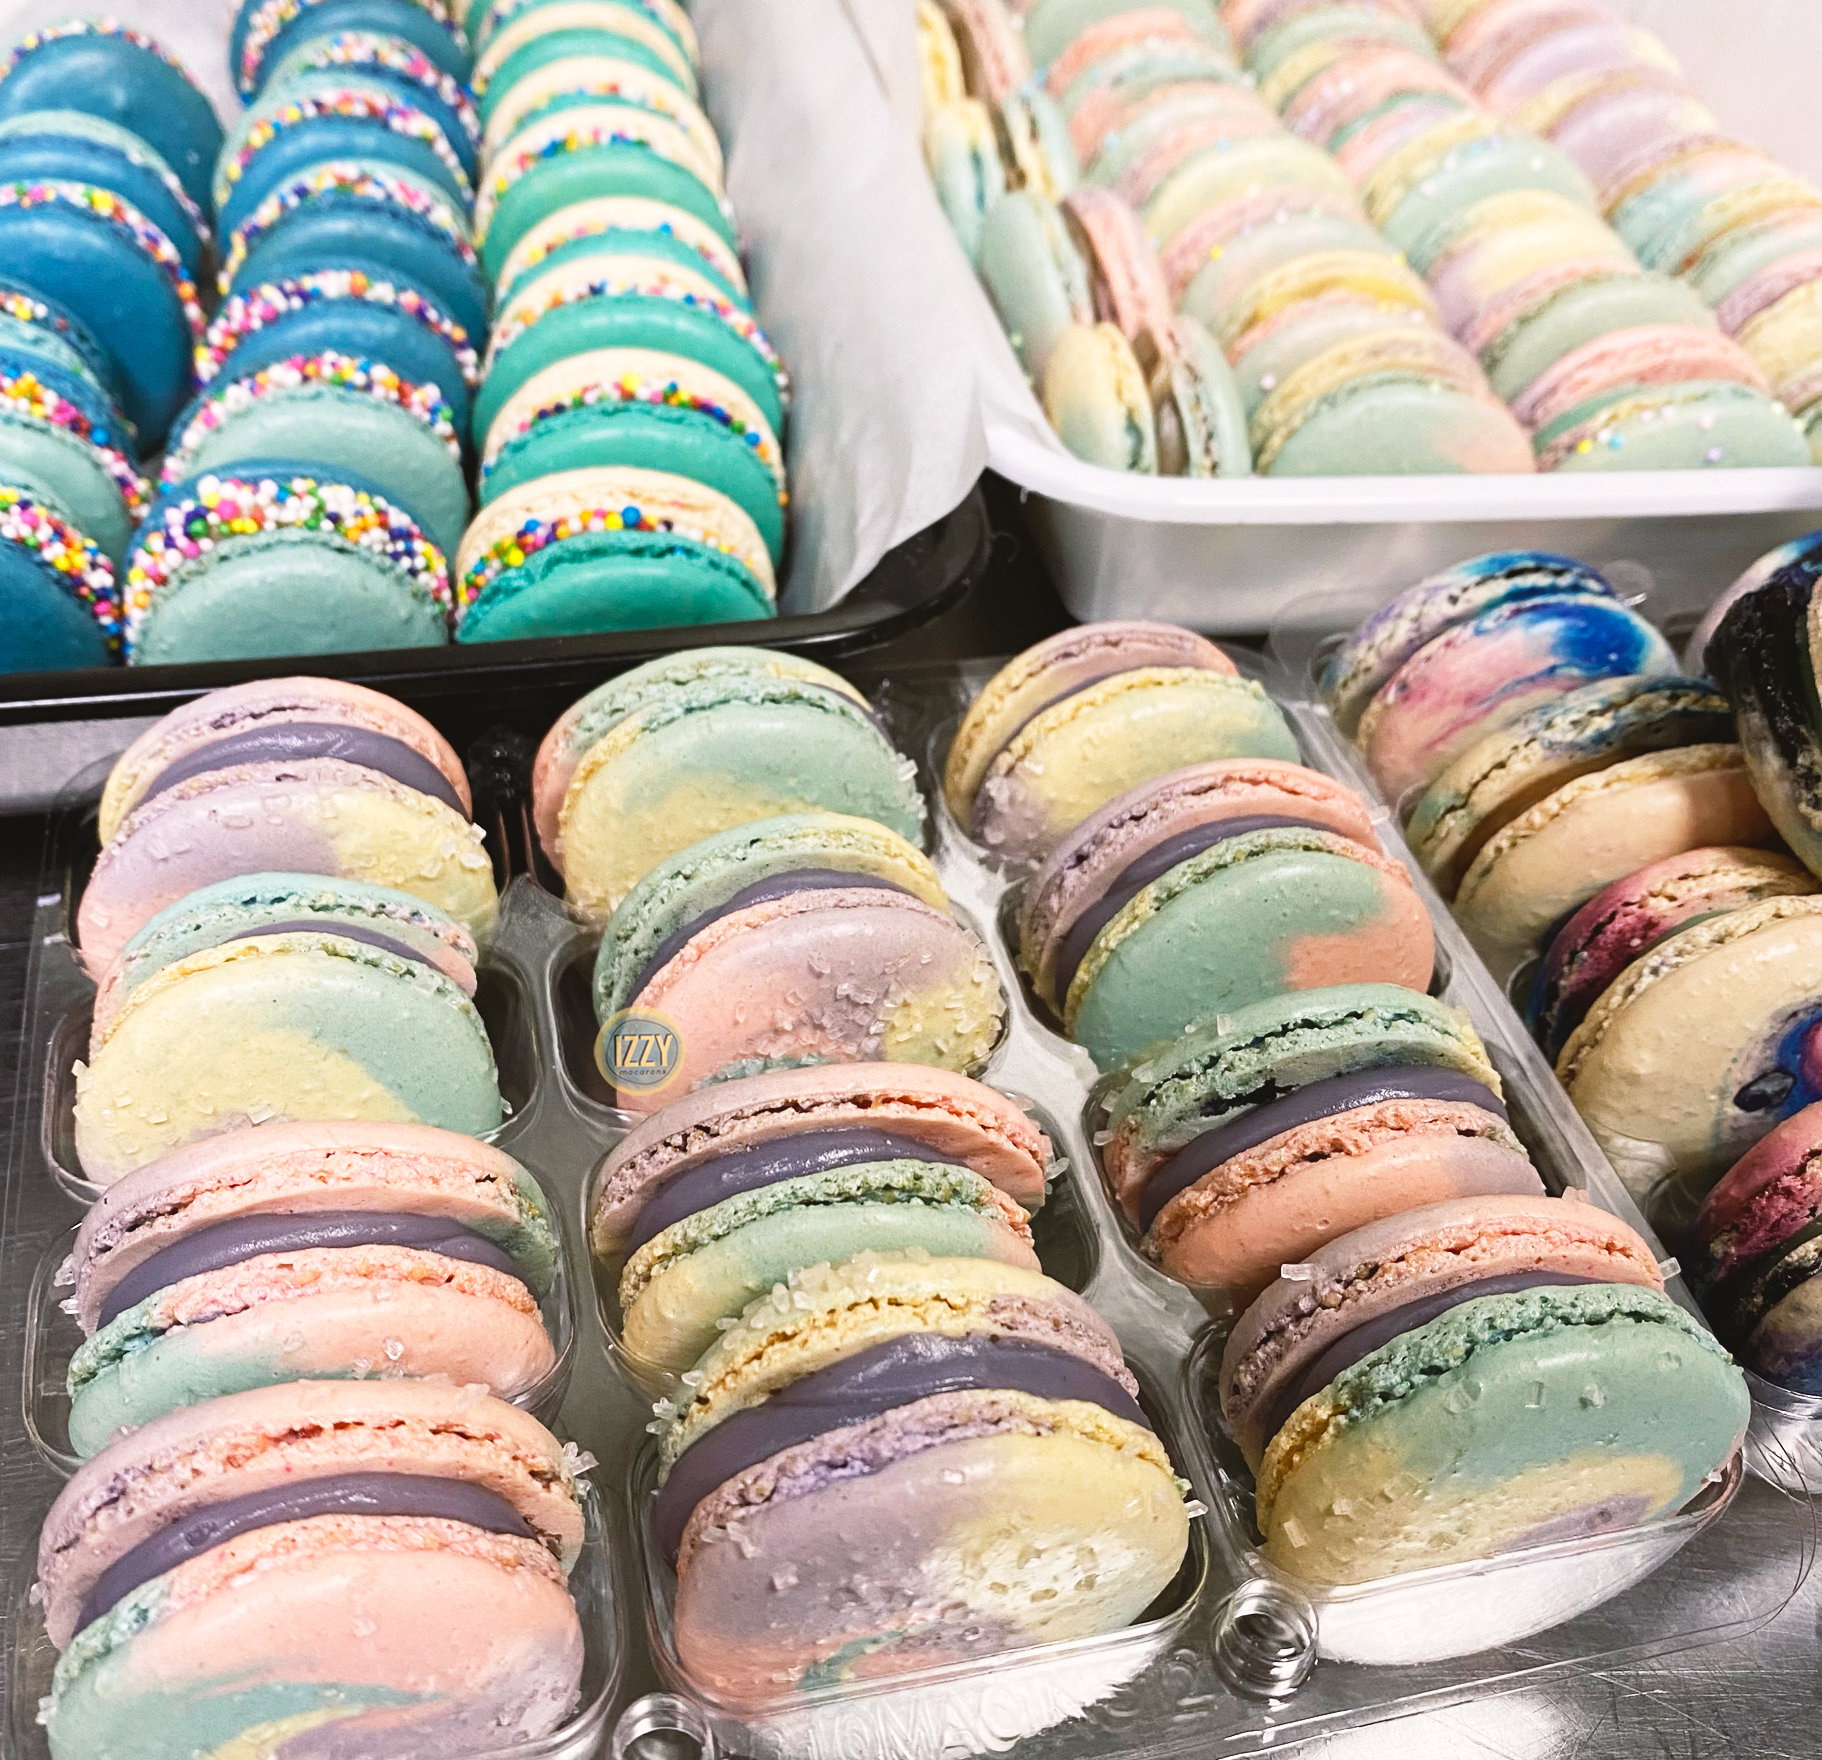 Finally used these edible gold stars on some galaxy themed macarons for an  extra touch 🤩✨ : r/macarons